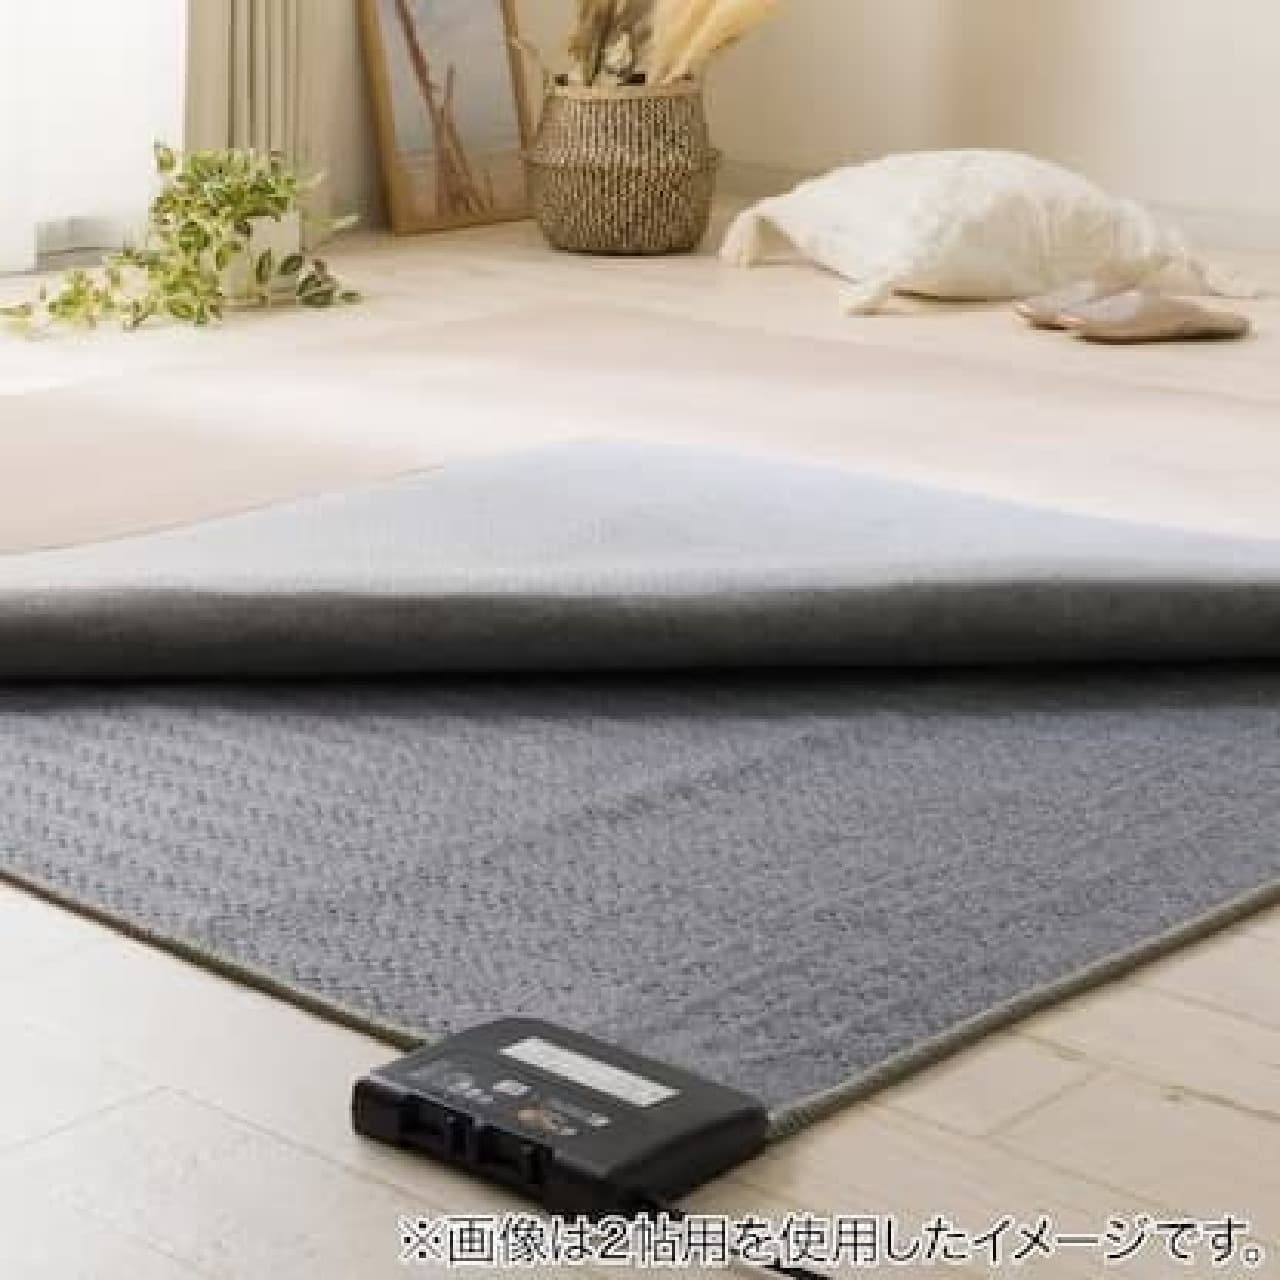 Hot carpets for single occupancy